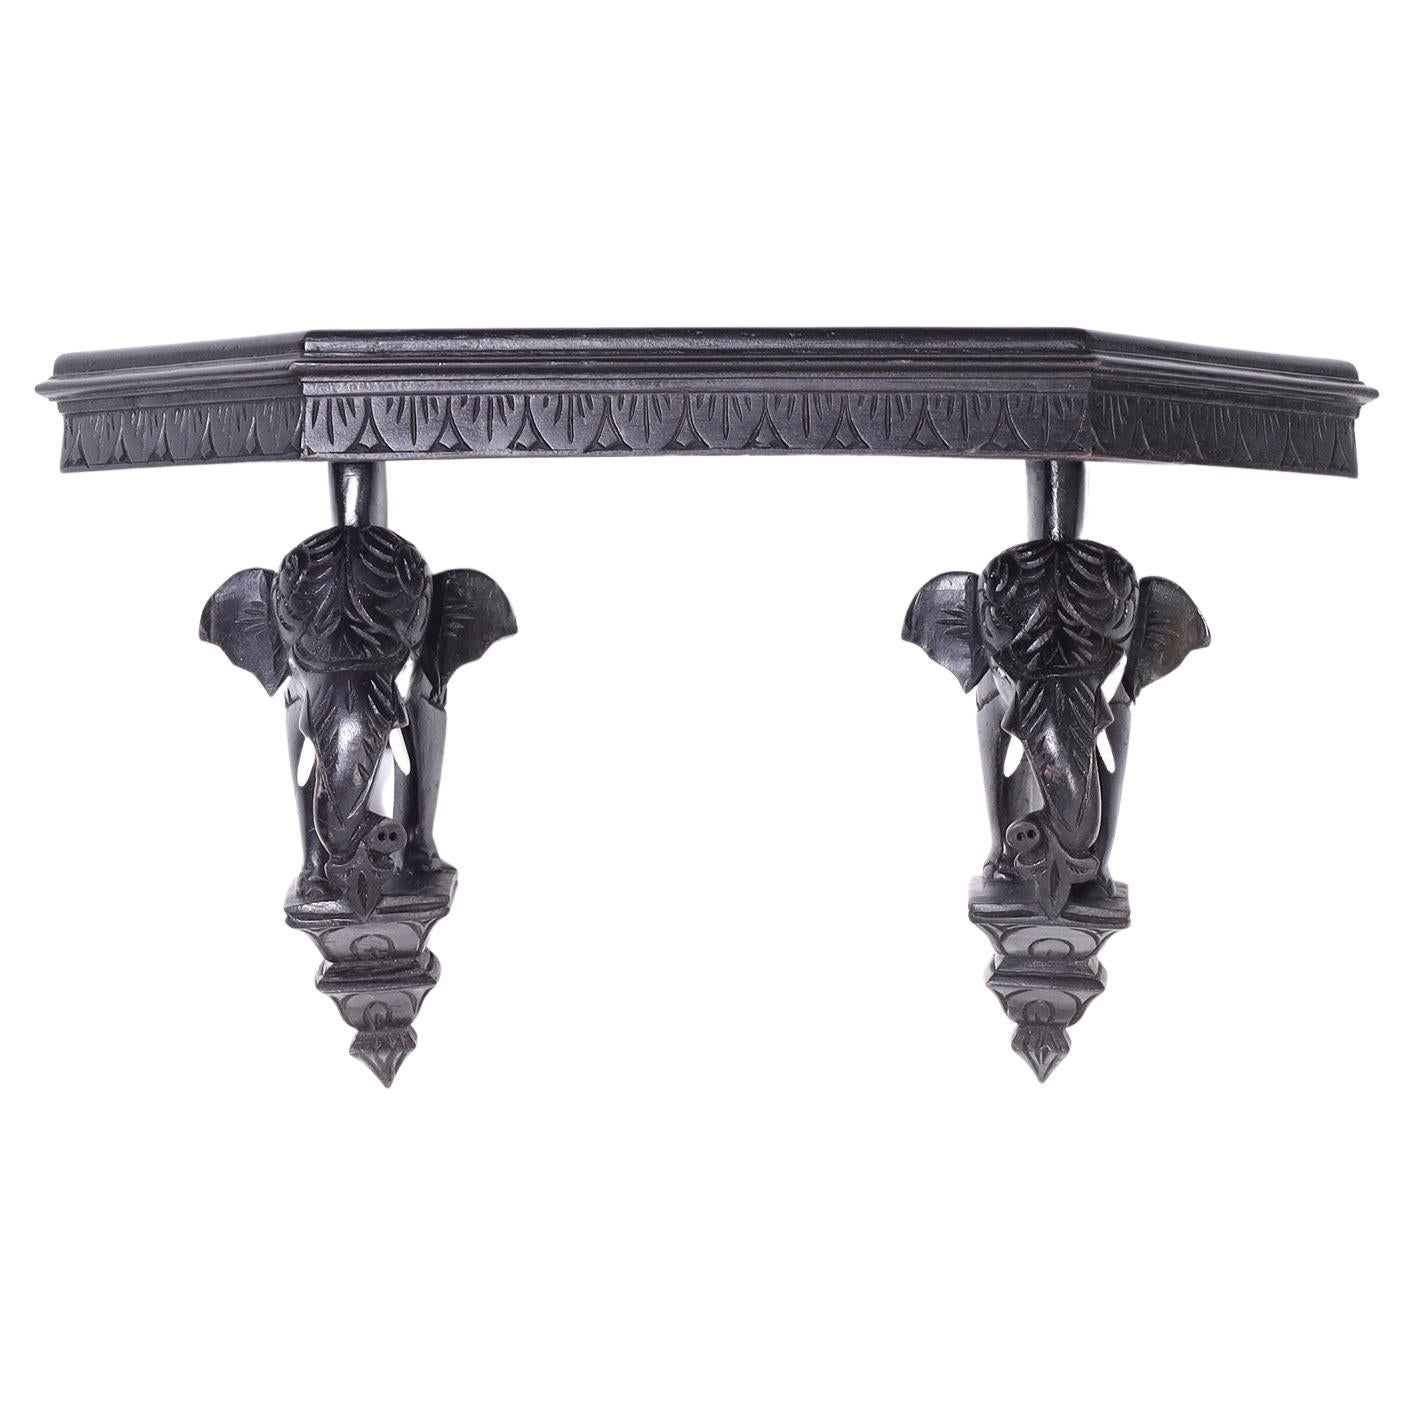 Intriguing British Colonial wall bracket or shelf carved from indigenous hardwood with an ebonized finish and featuring a pair of elephant supports on platforms.